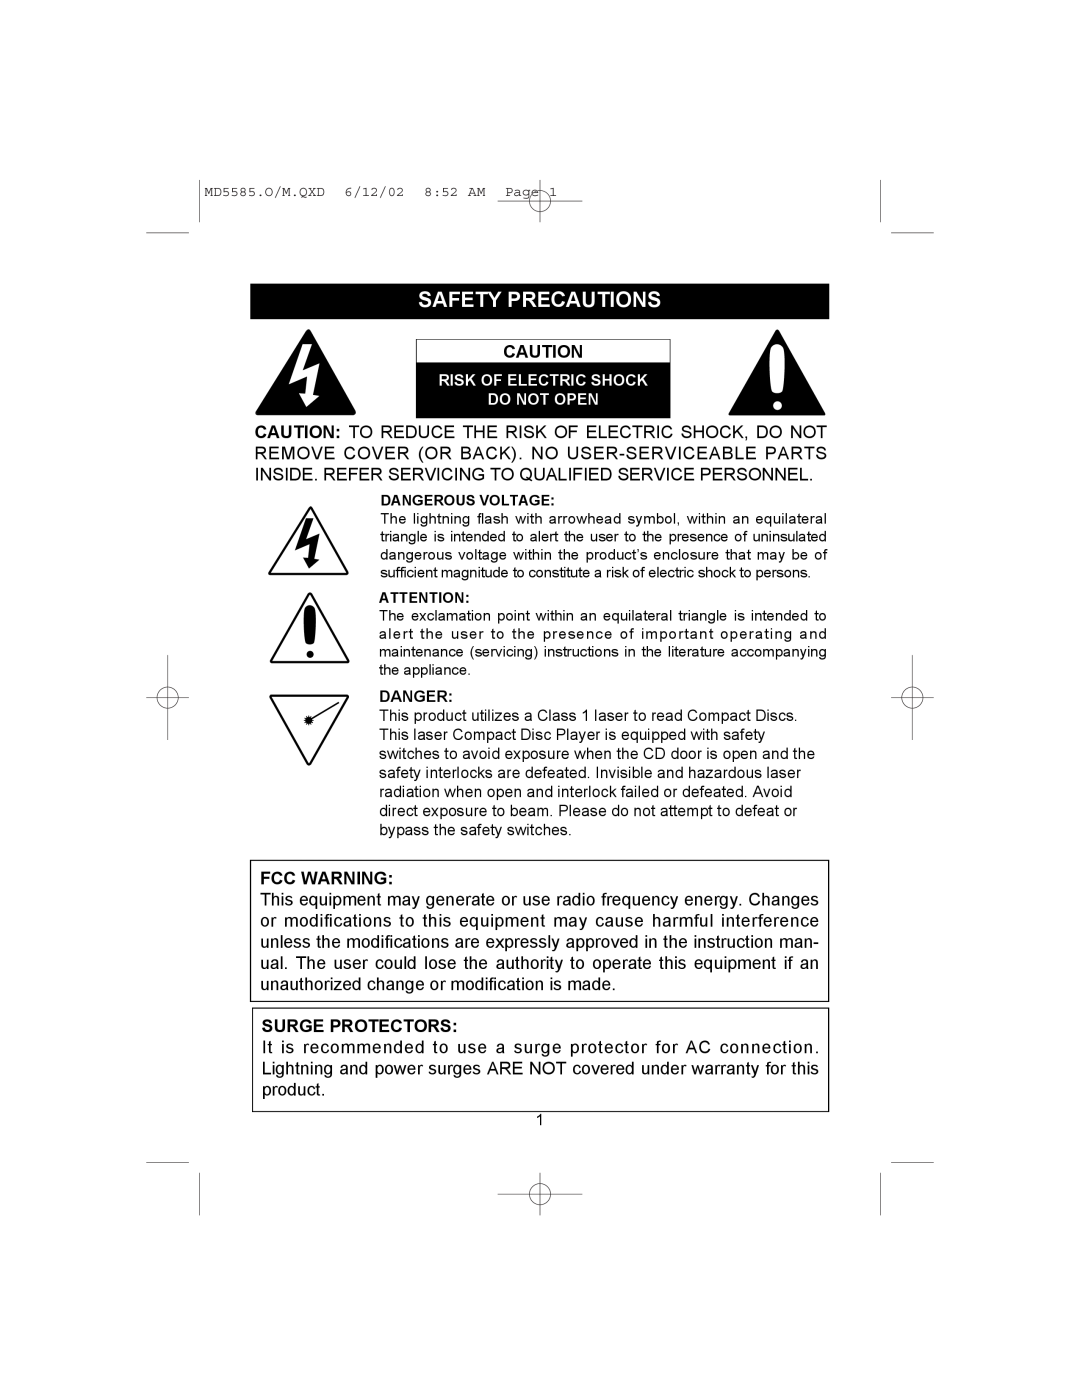 Memorex MD5585 operating instructions Safety Precautions, Fcc Warning, Surge Protectors 